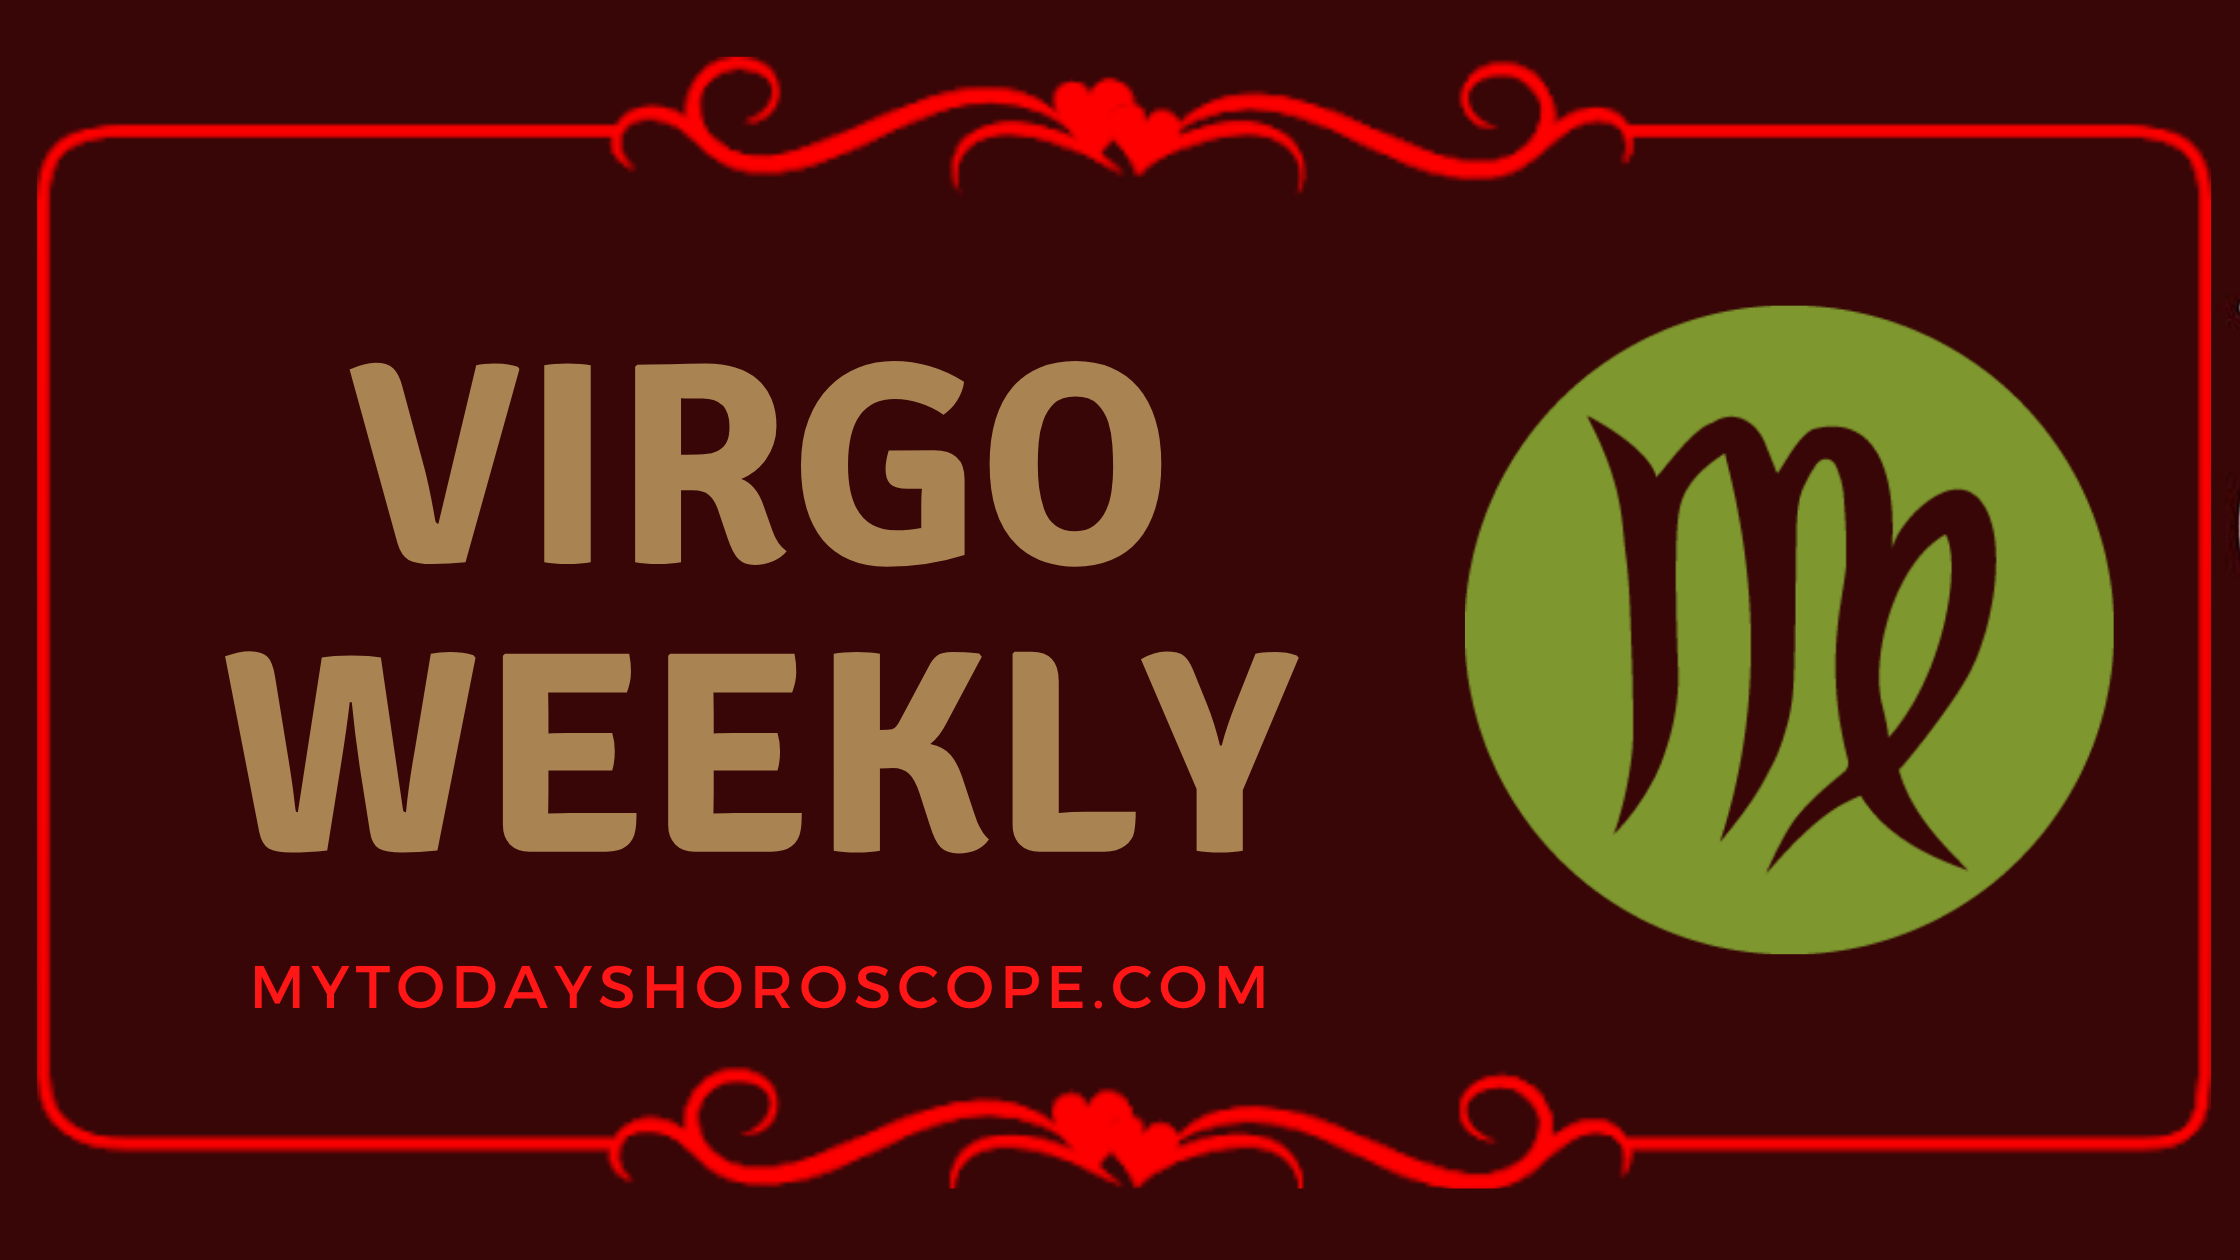 Virgo Weekly Horoscope for Love, Work and Well-being